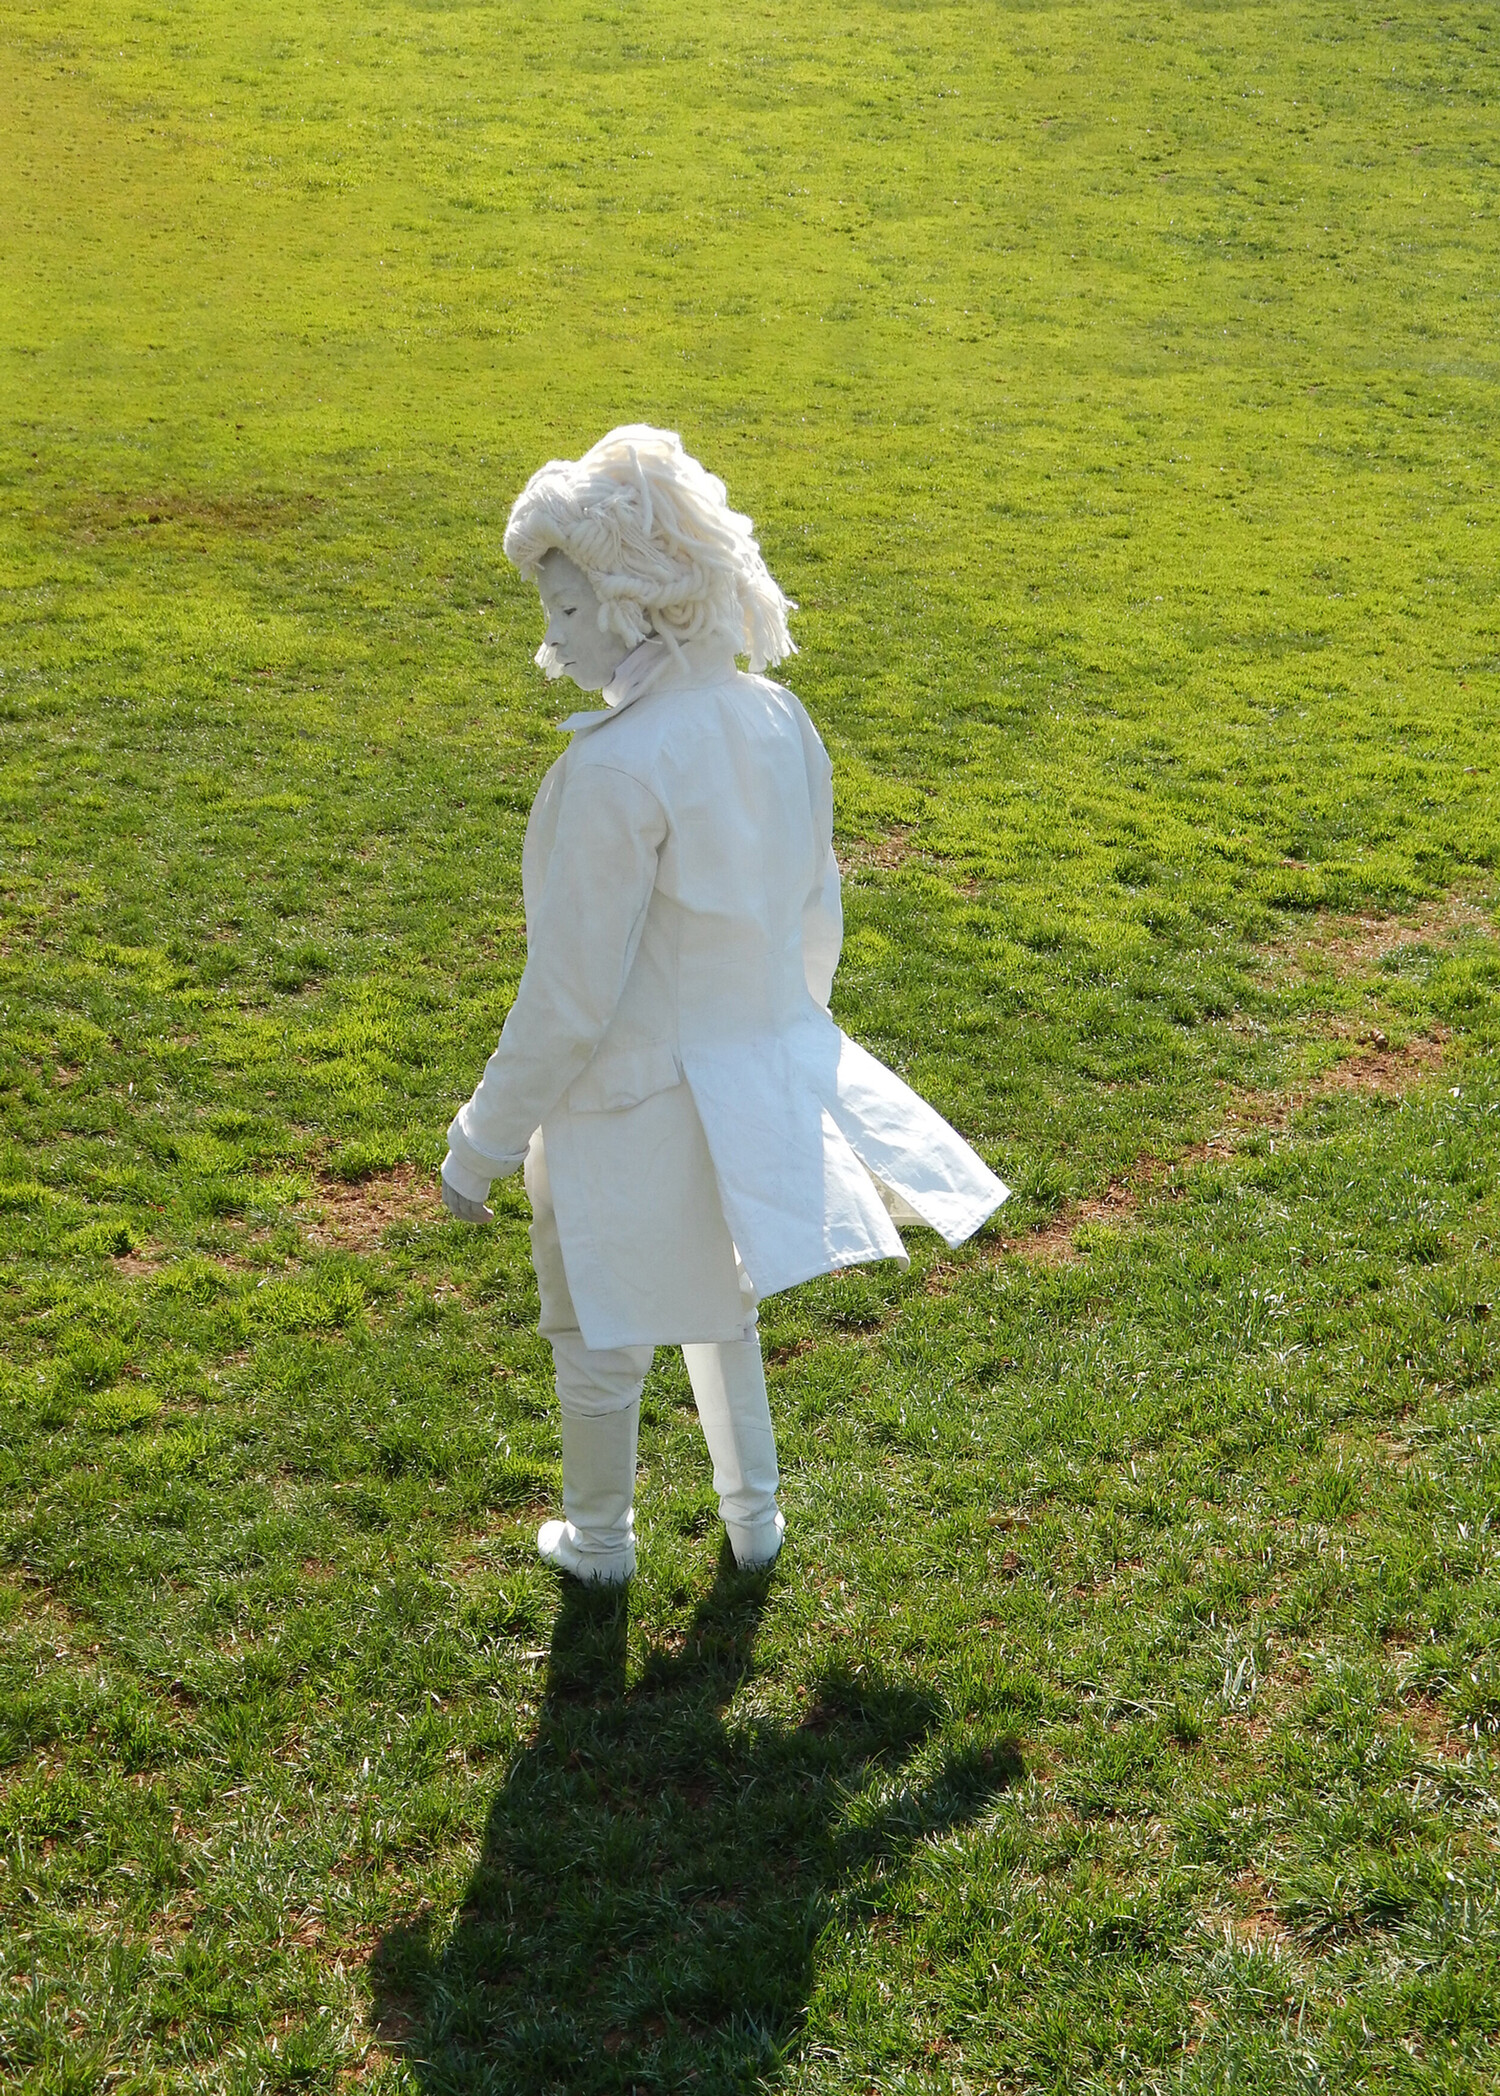 5a-Even-ghosts-have-their-ghosts.-A-shadow-follows-The-Ghost-of-Thomas-Jefferson.-Charlottesville-VA.jpg